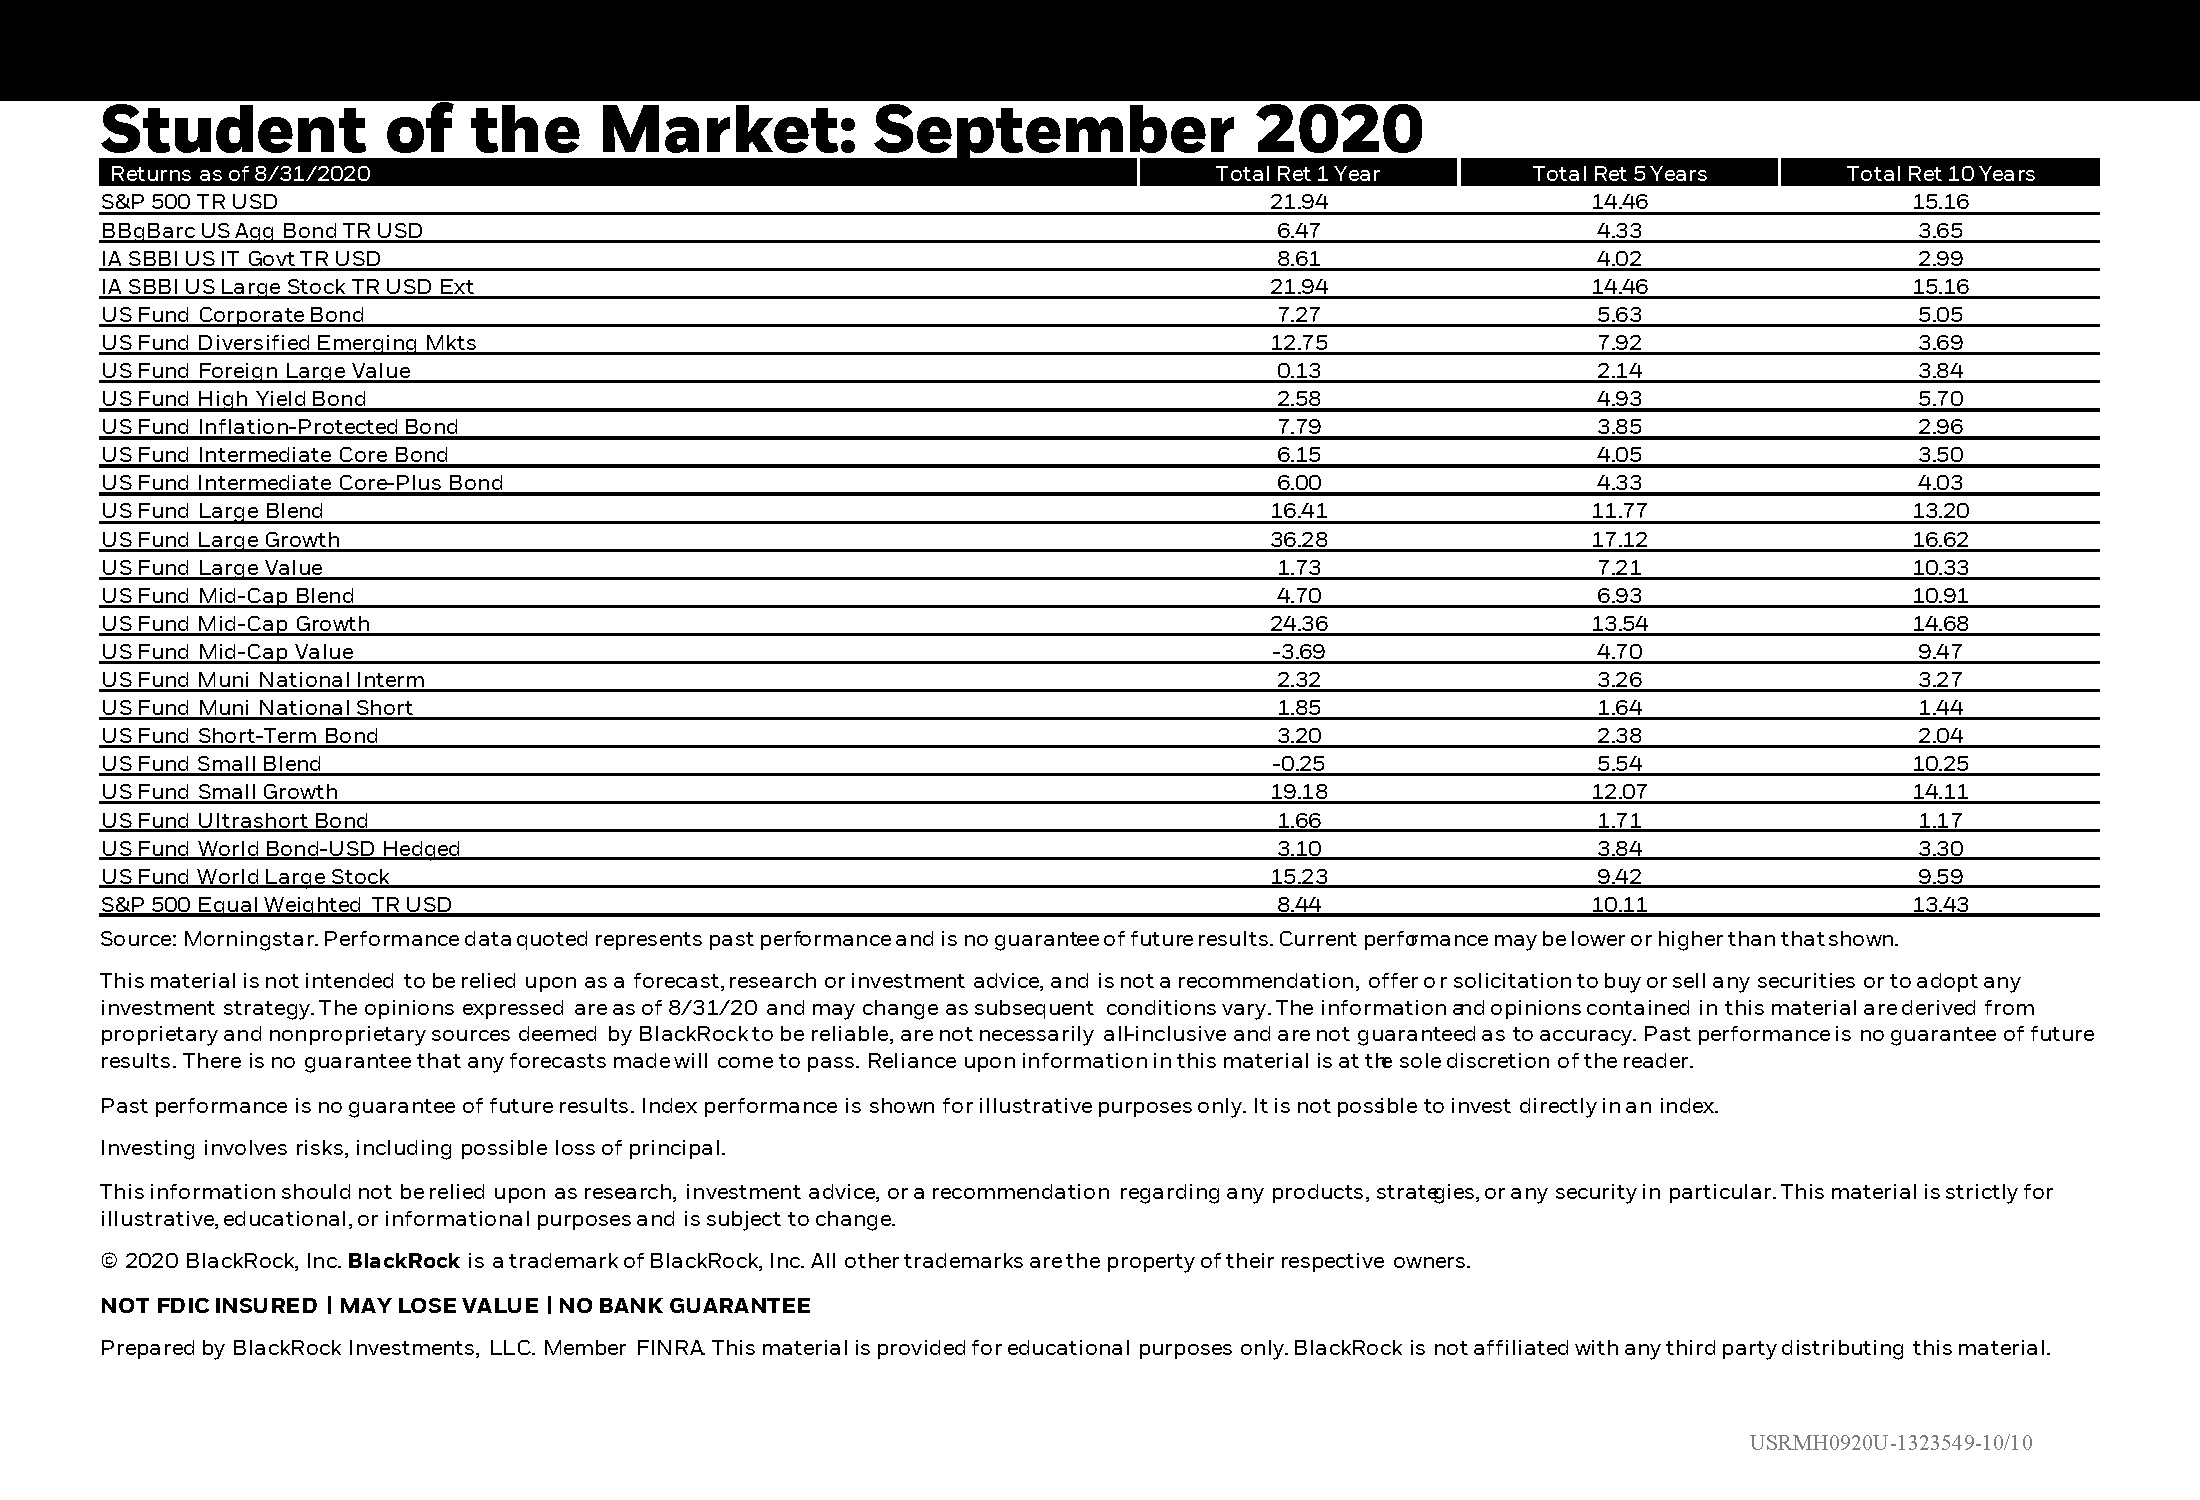 Student of the Market - August Stock Performance